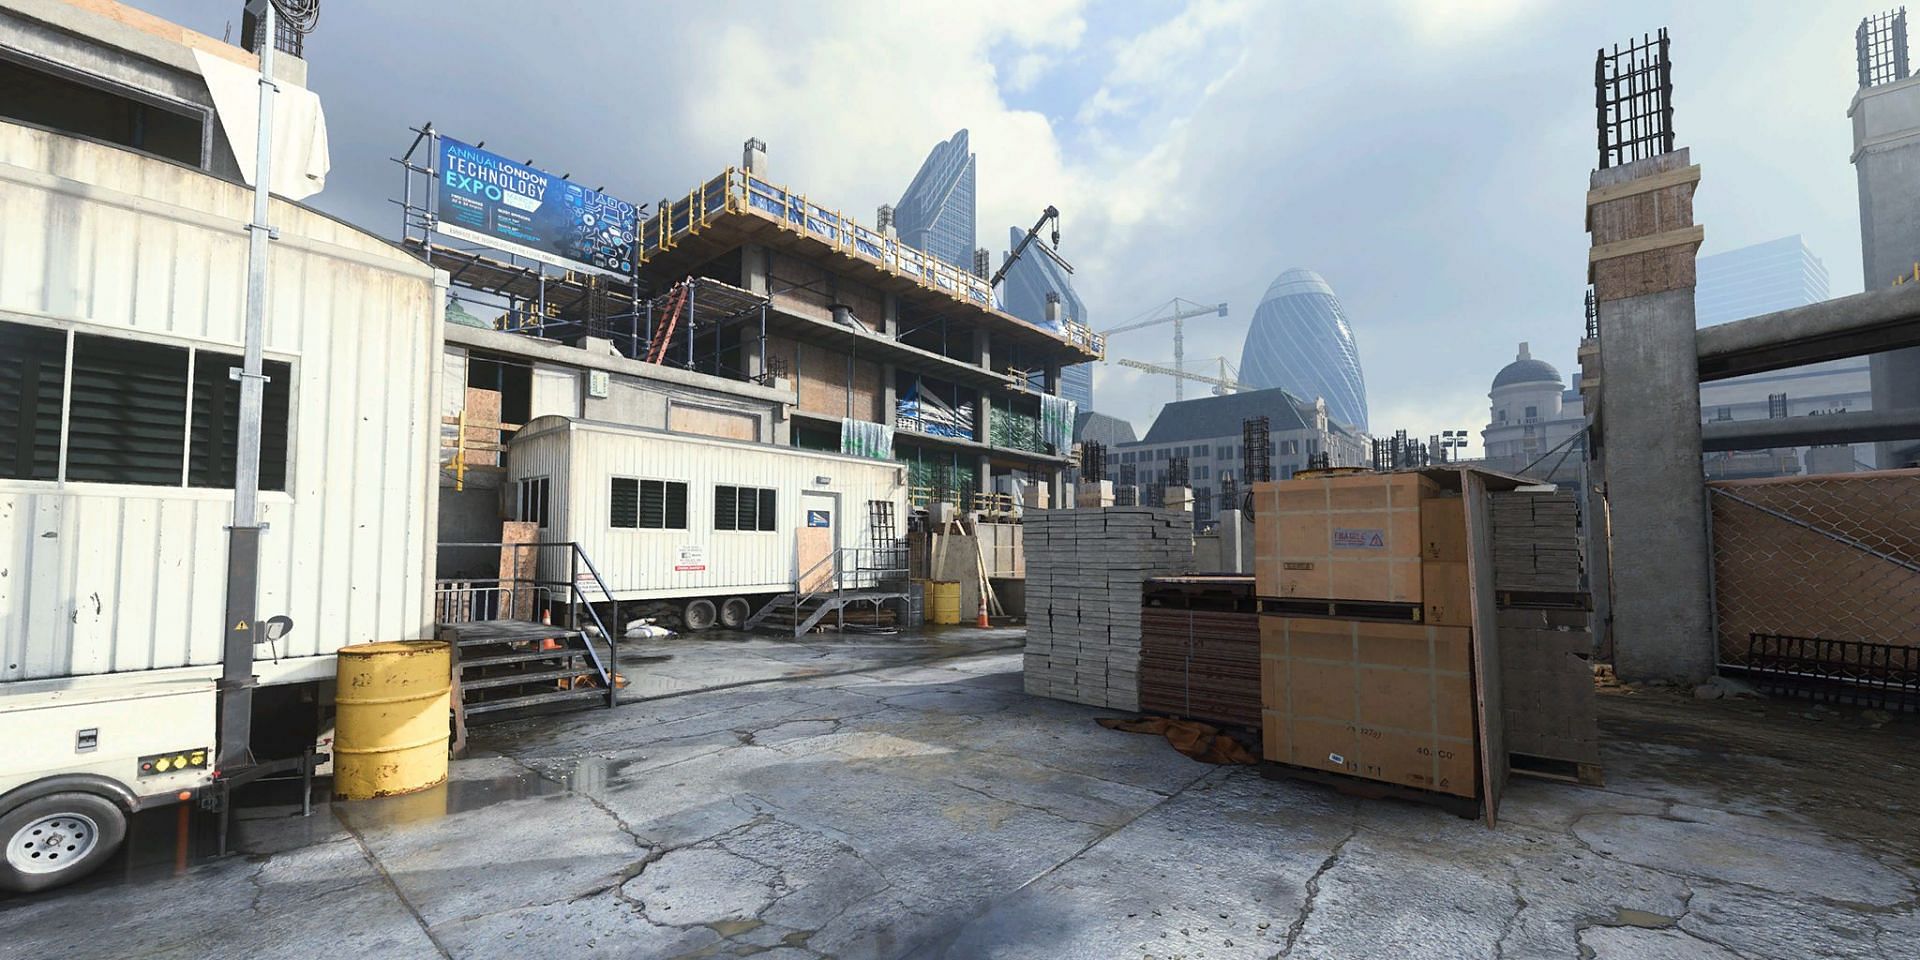 Hardhat is coming to COD Mobile in Season 2 but players can secretly play the map in Season 1 due to a glitch (Image via Activision)